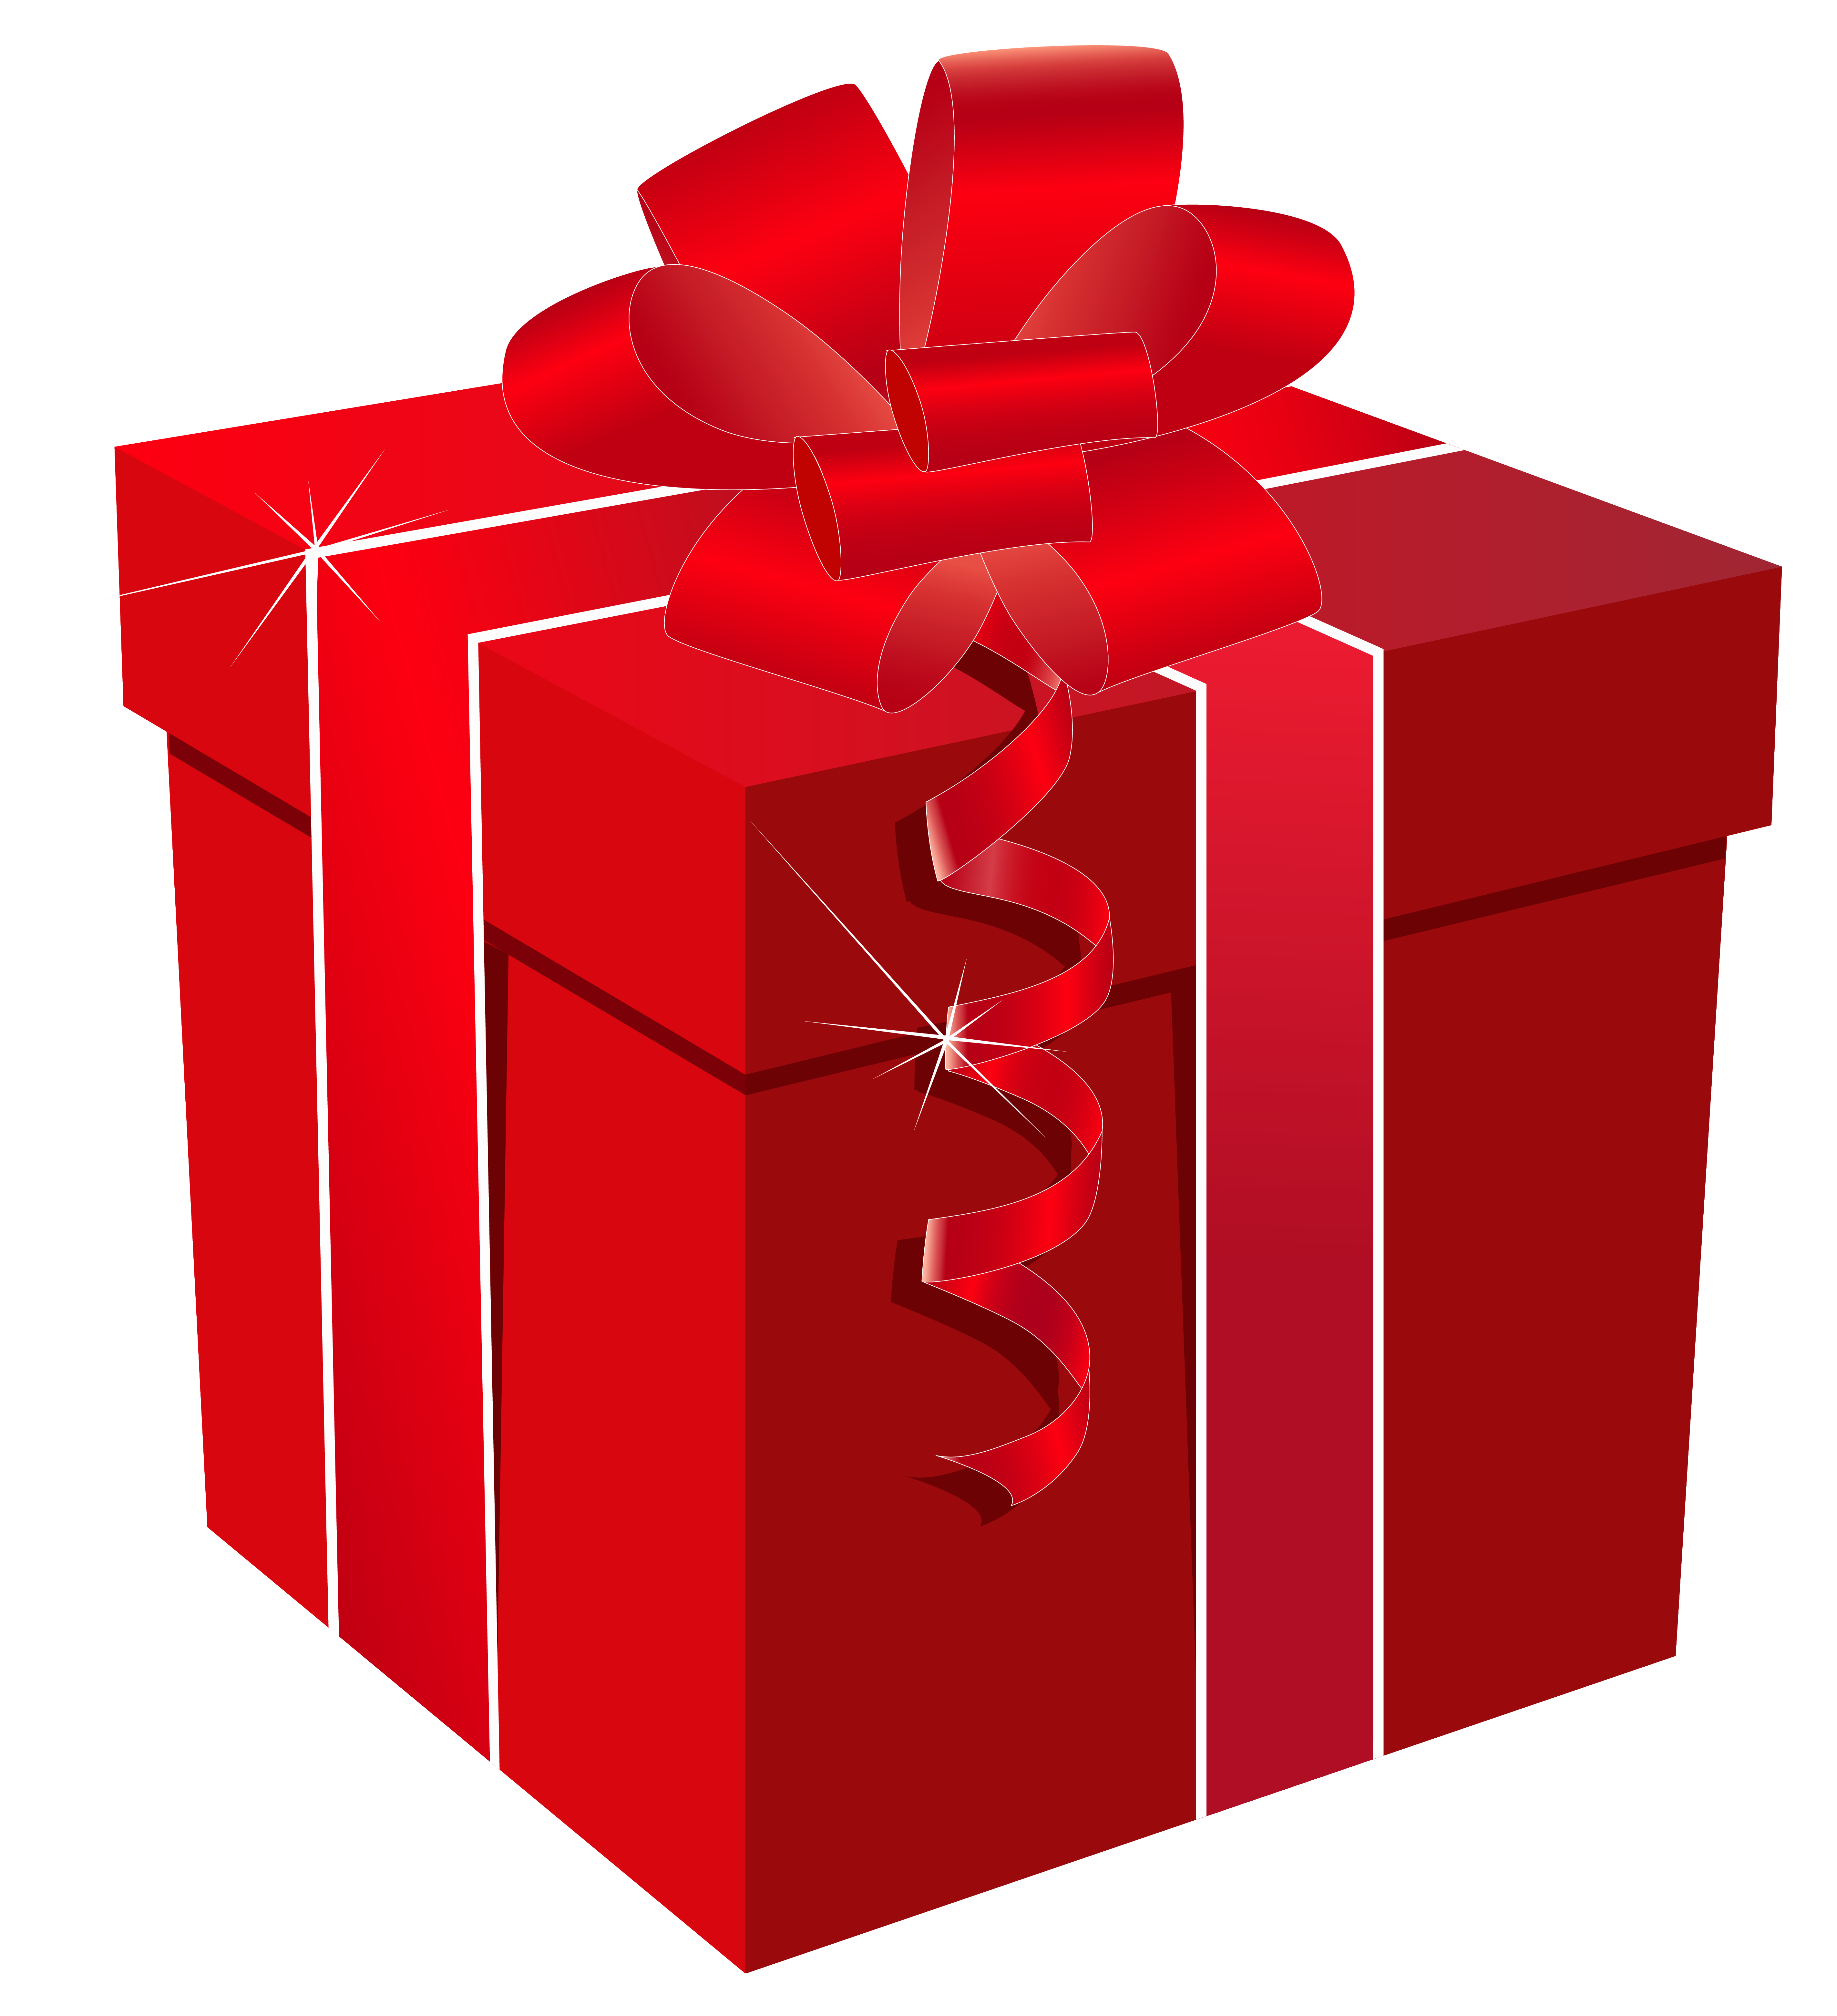 Red Gift Box with Red Bow PNG Clipart Image